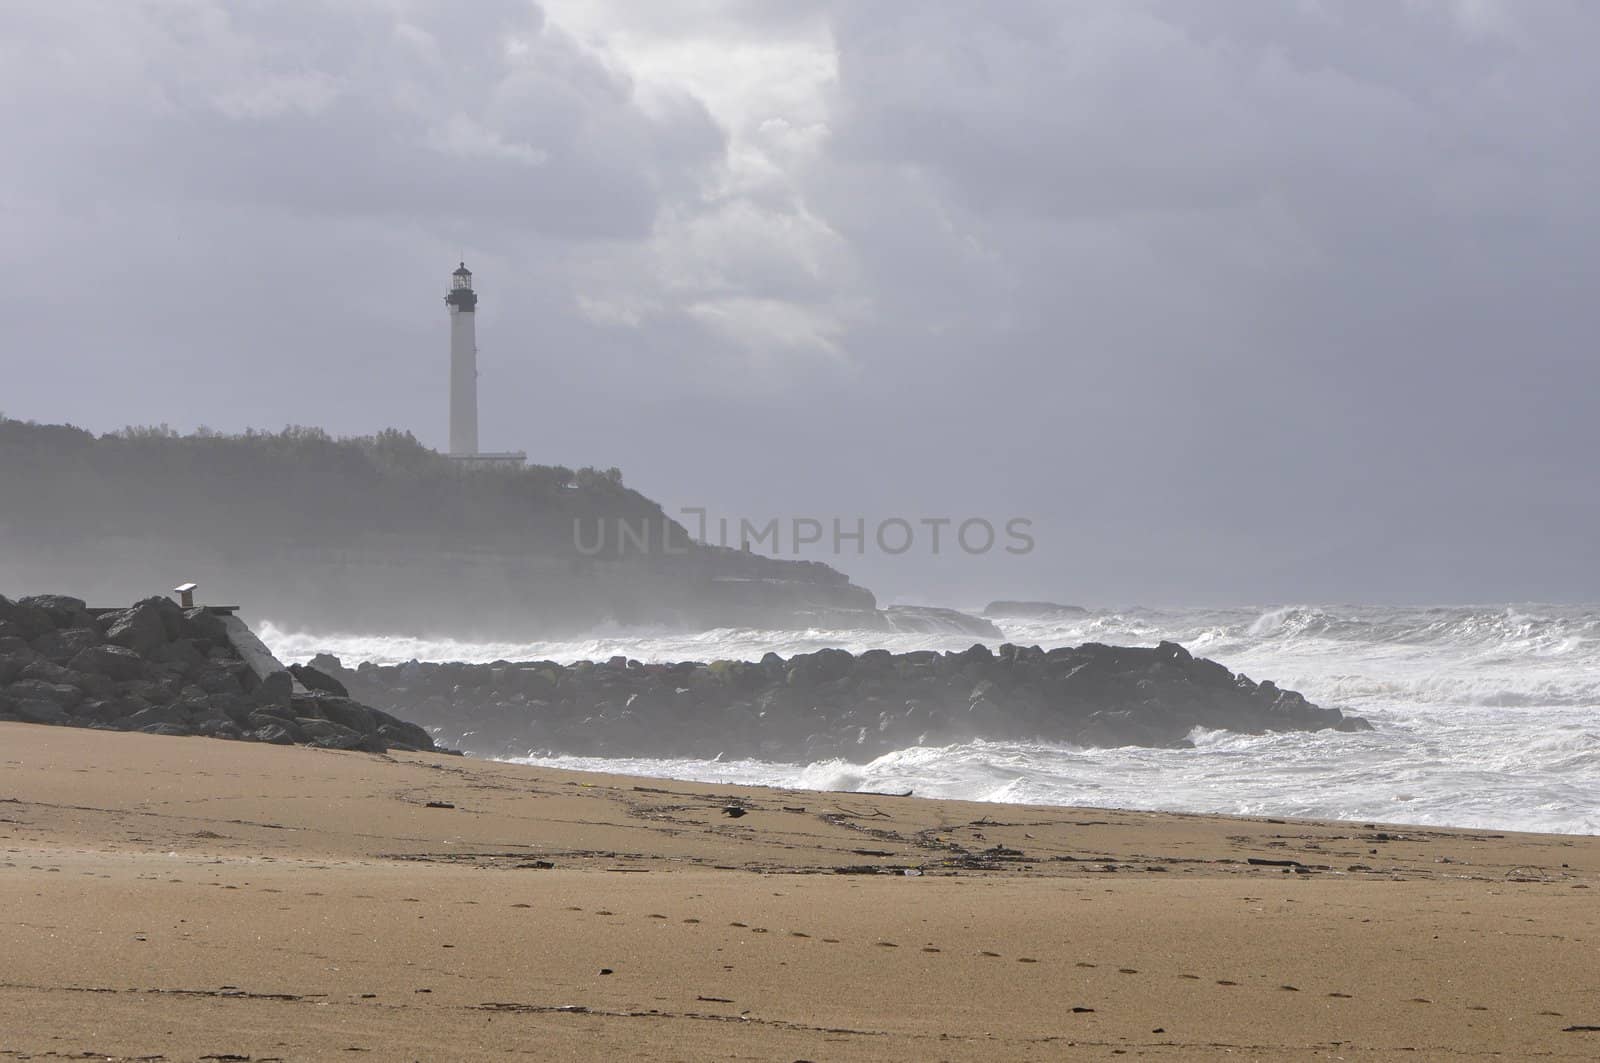 Biarritz lighthouse on the french Atlantic coast during a stormy day